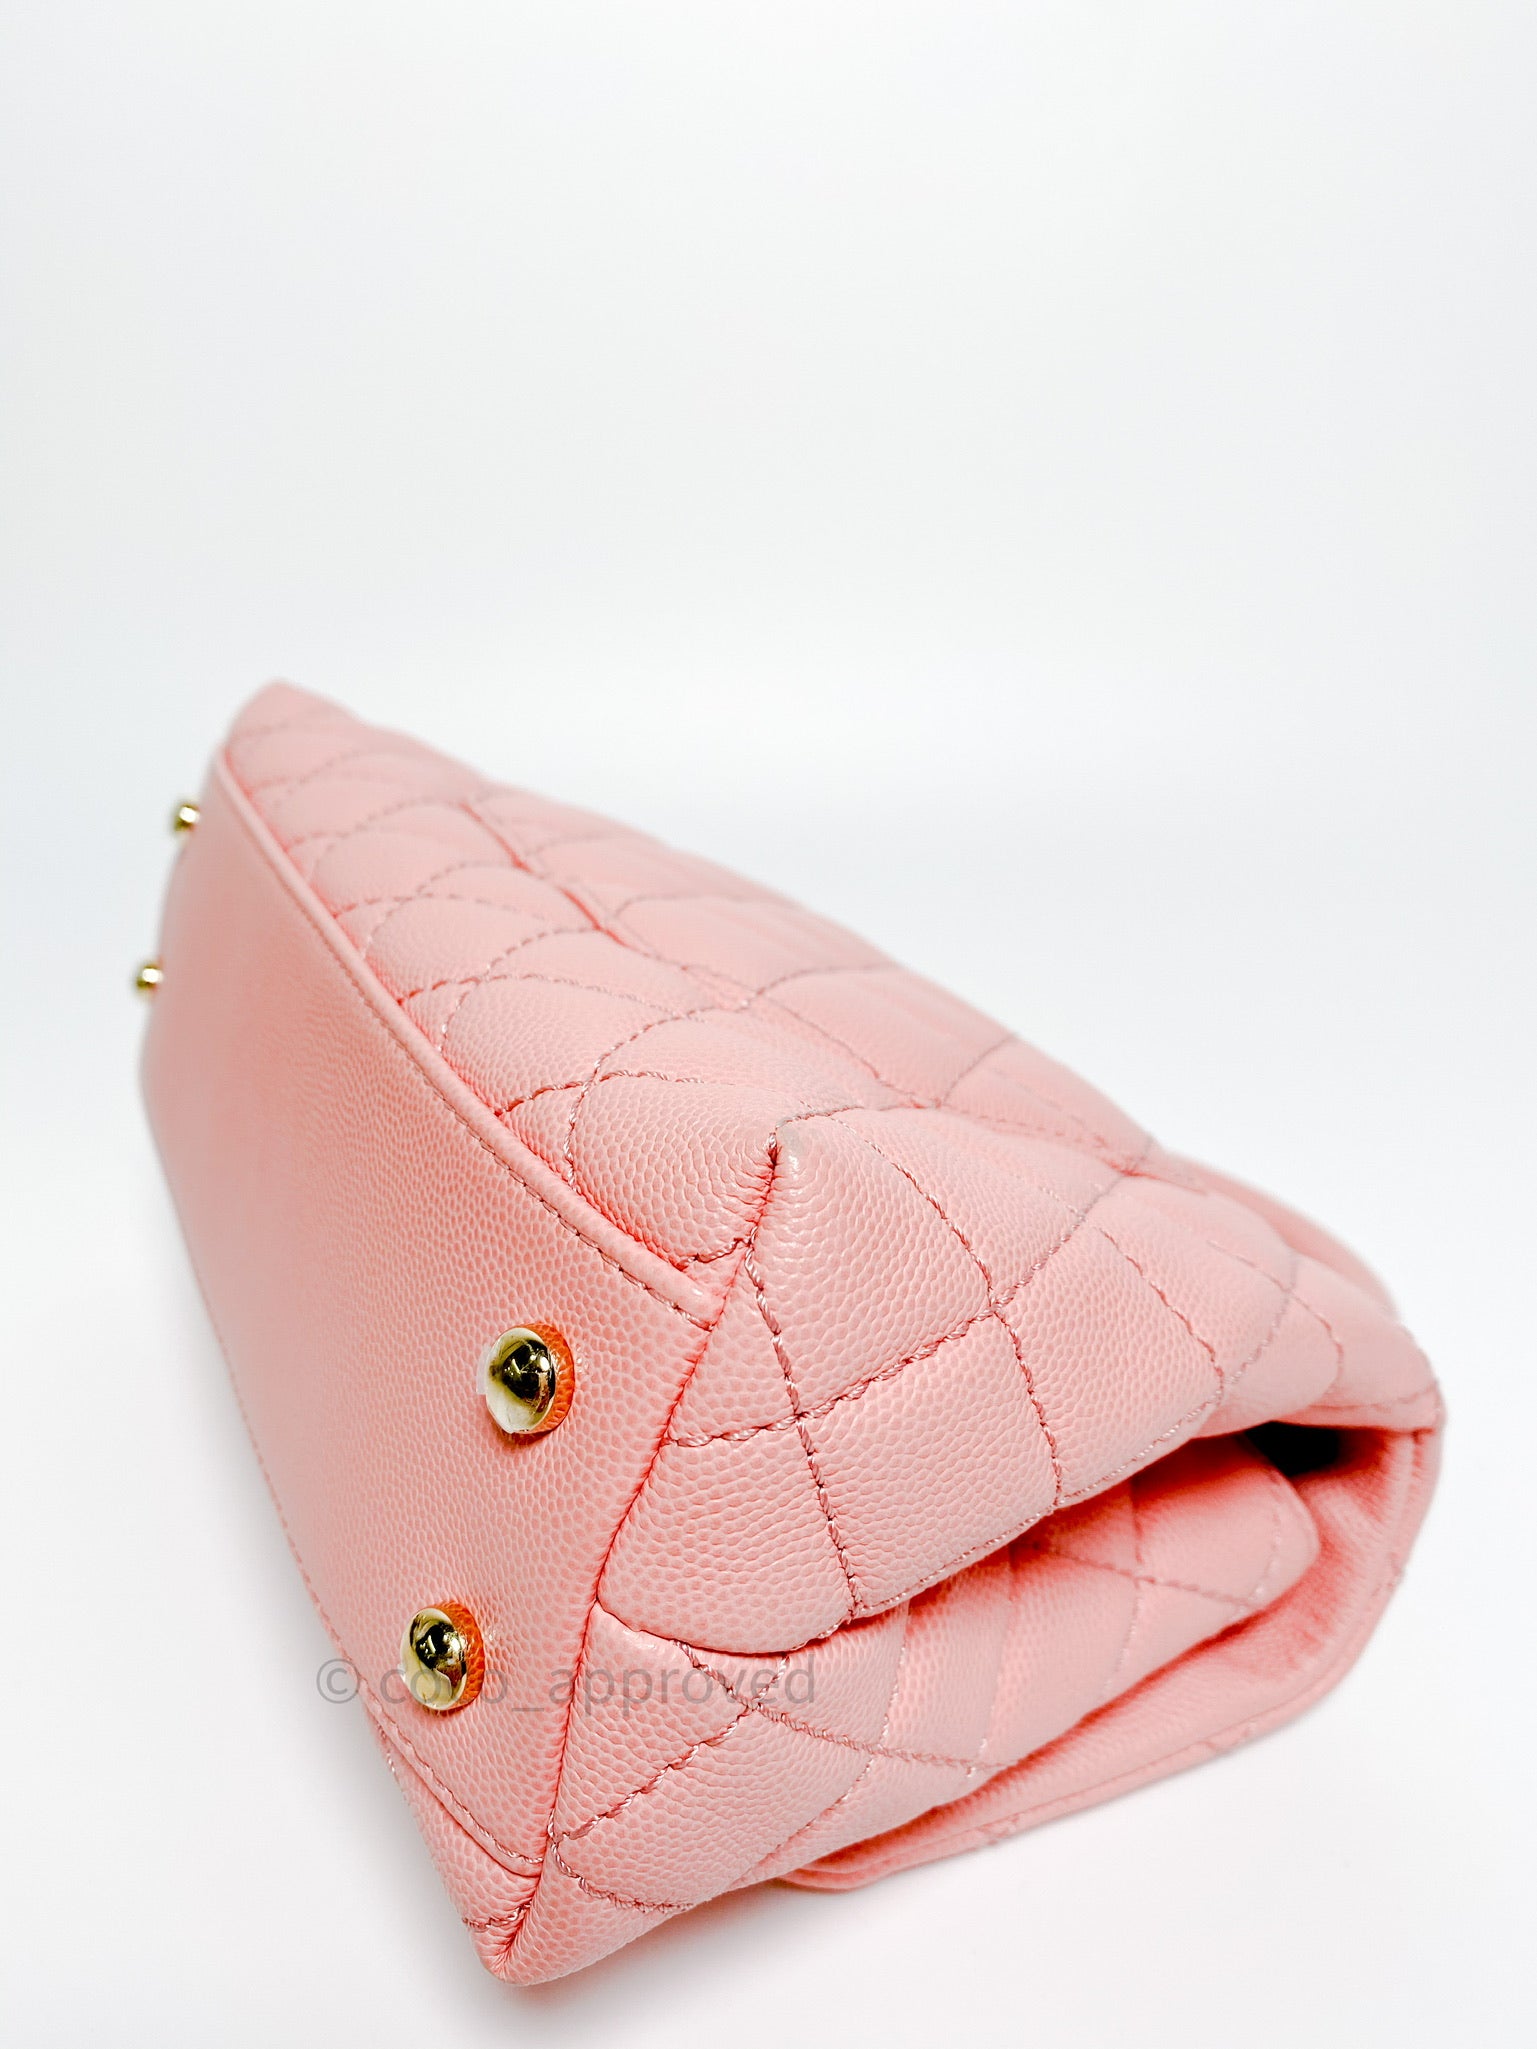 Chanel Small Coco Handle Flap Bag Pink Iridescent Caviar Silver Hardwa –  Madison Avenue Couture